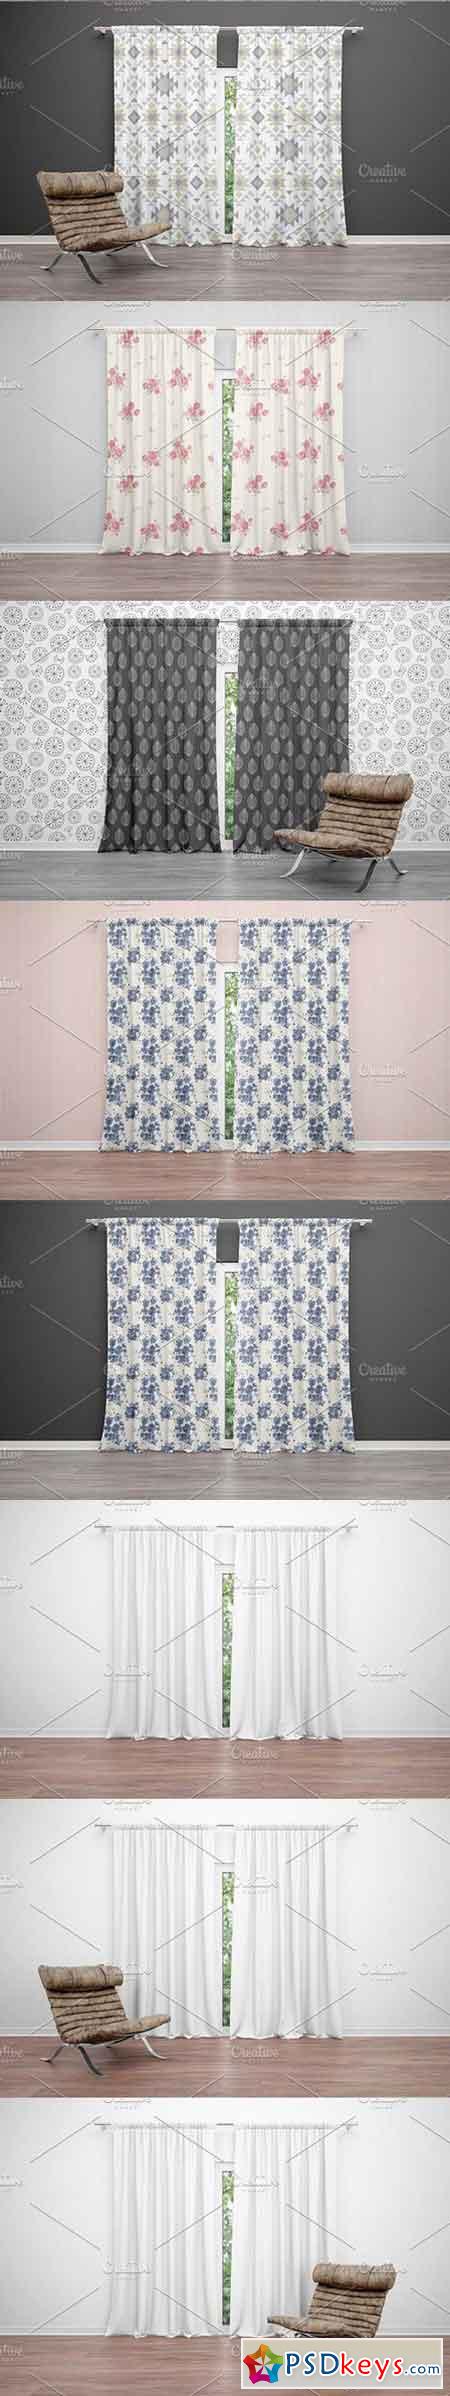 Download Curtains Mockup 1656268 » Free Download Photoshop Vector ...